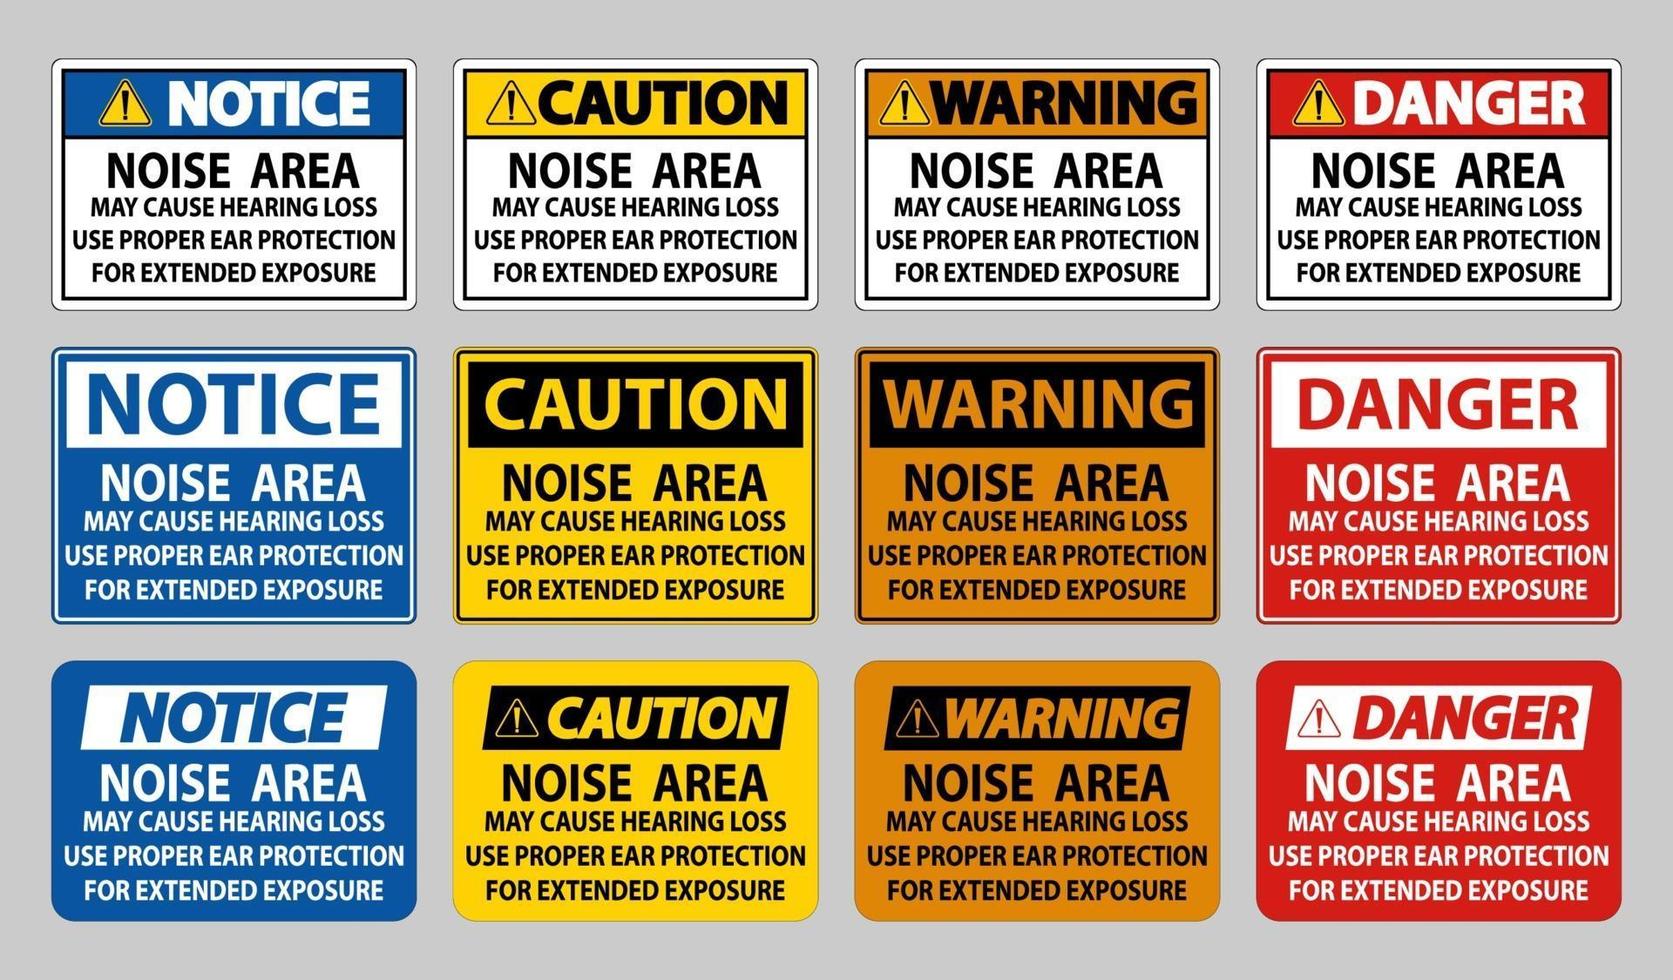 Noise Area May Cause Hearing Loss, Use Proper Ear Protection For Extended Exposure vector